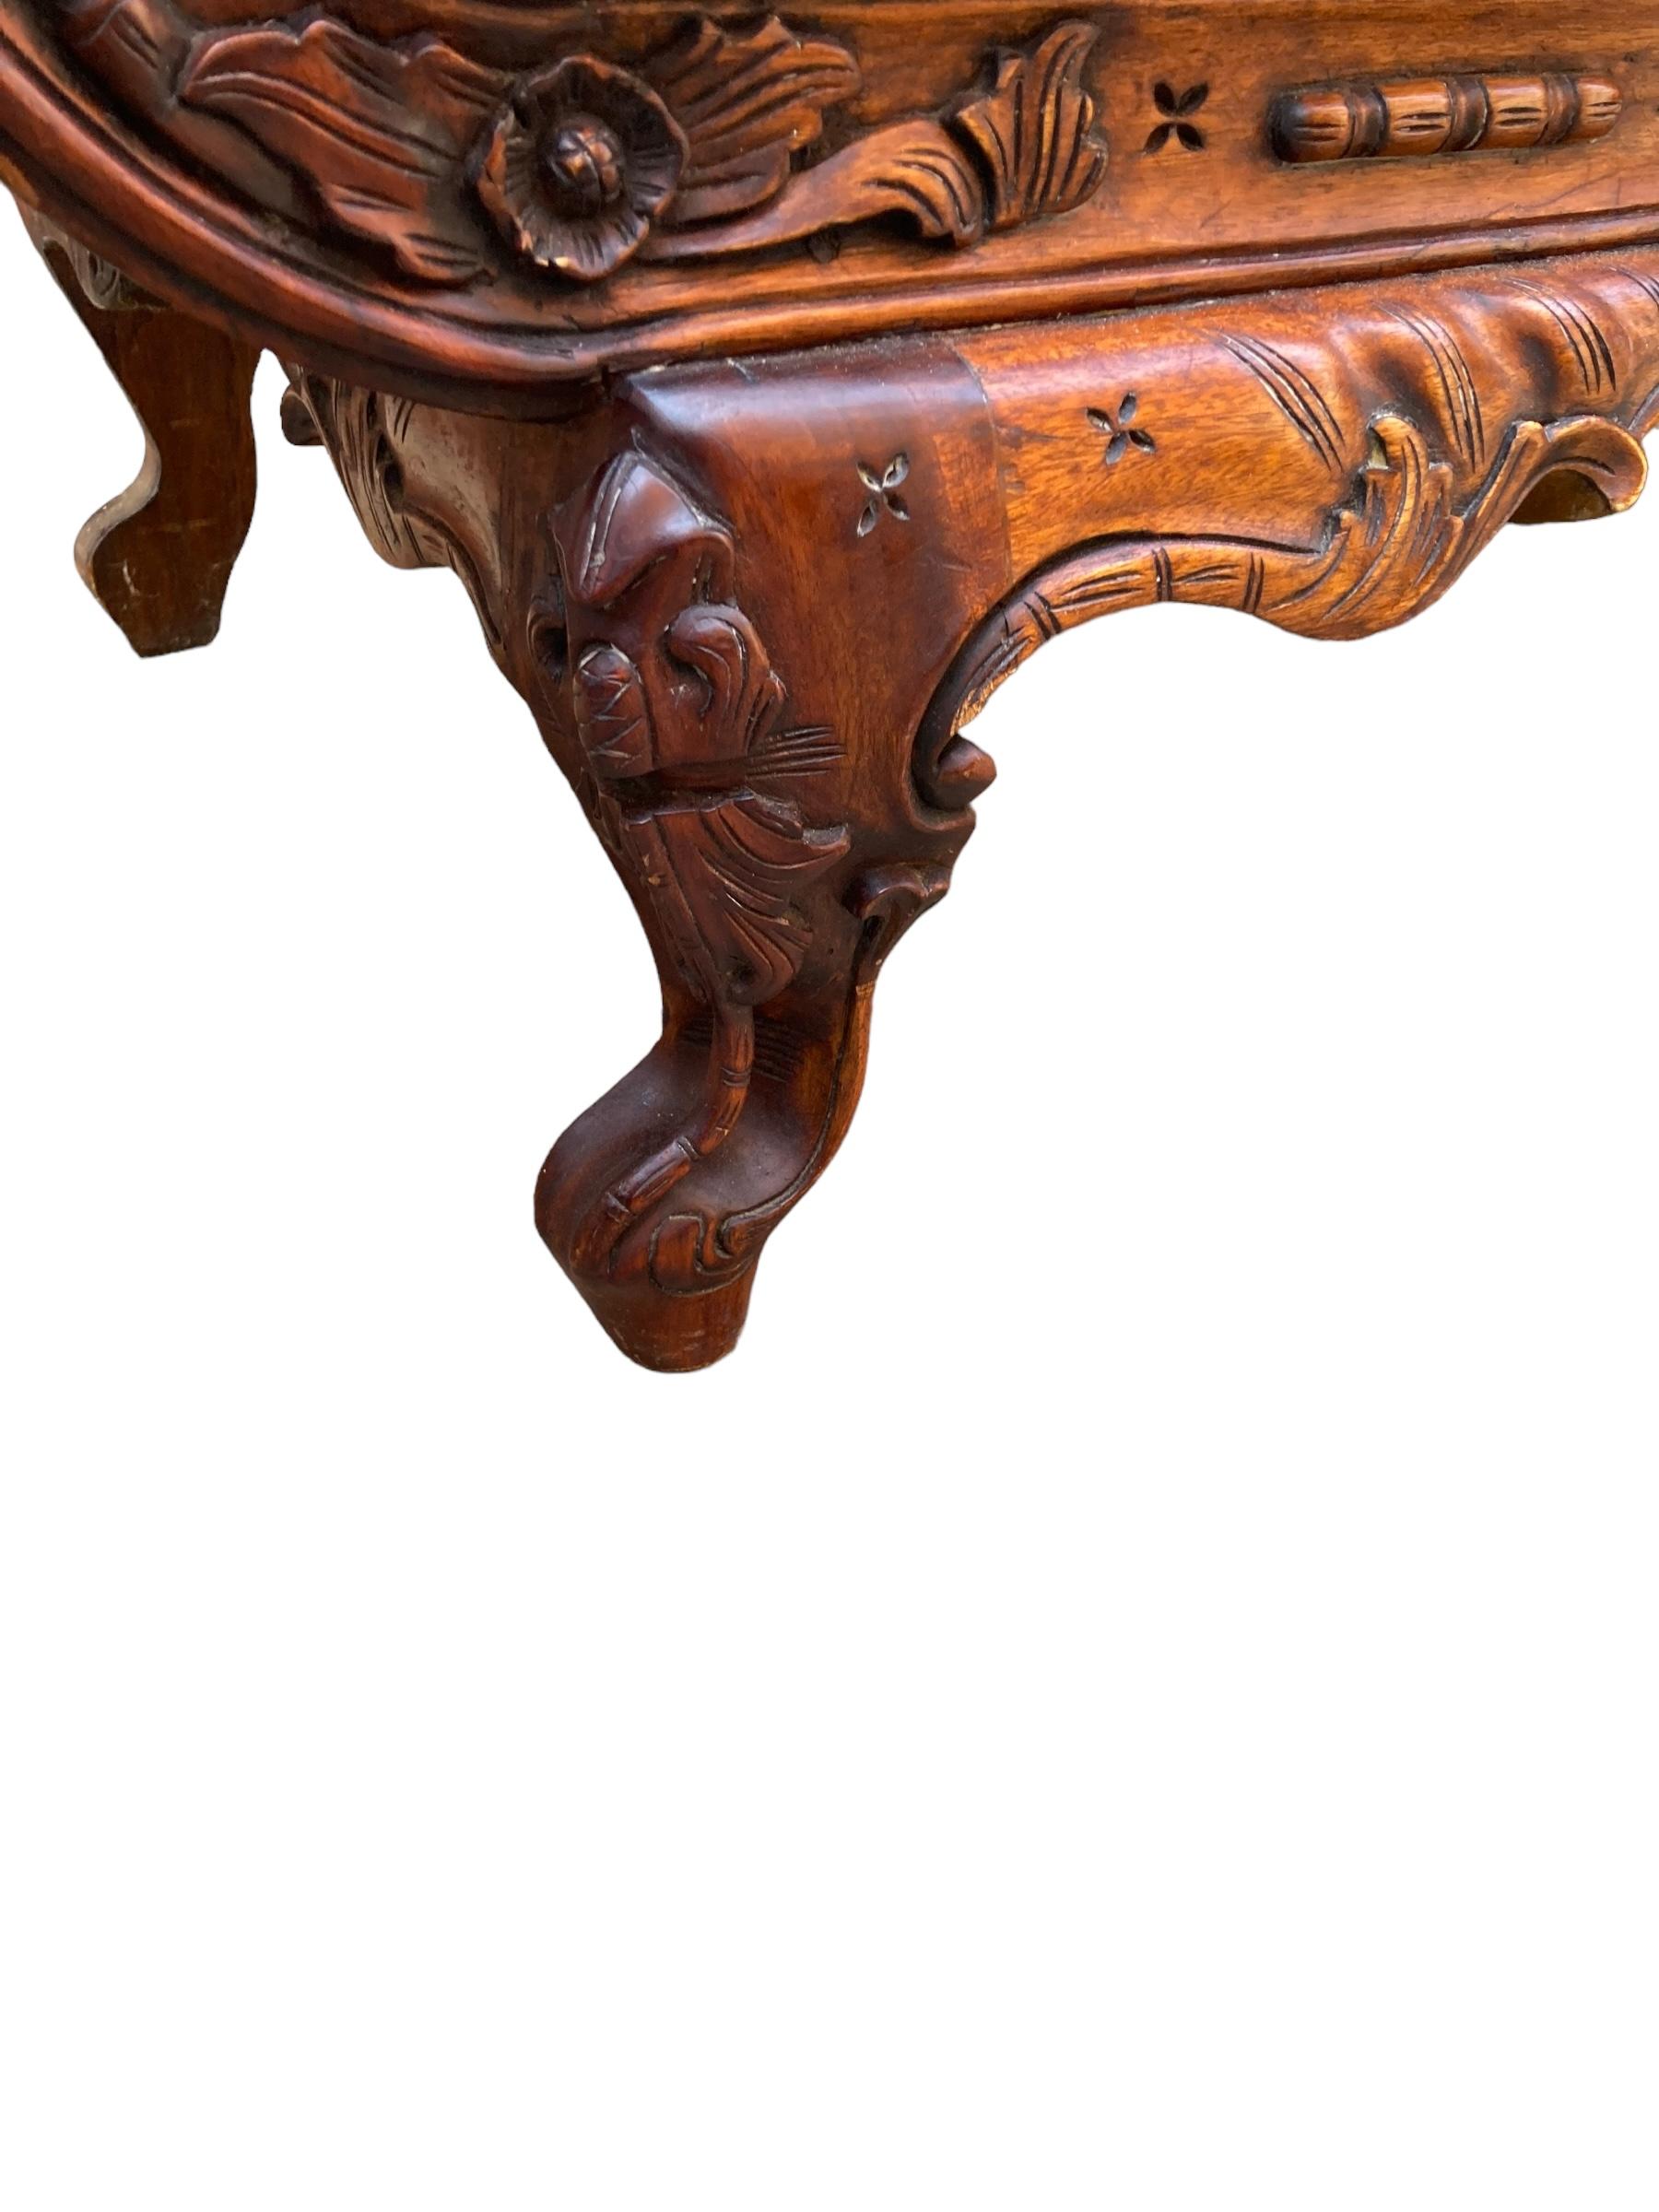 Original Hand Carved Mahogany Victorian Telephone or Gossip Bench, Bergere  For Sale 6